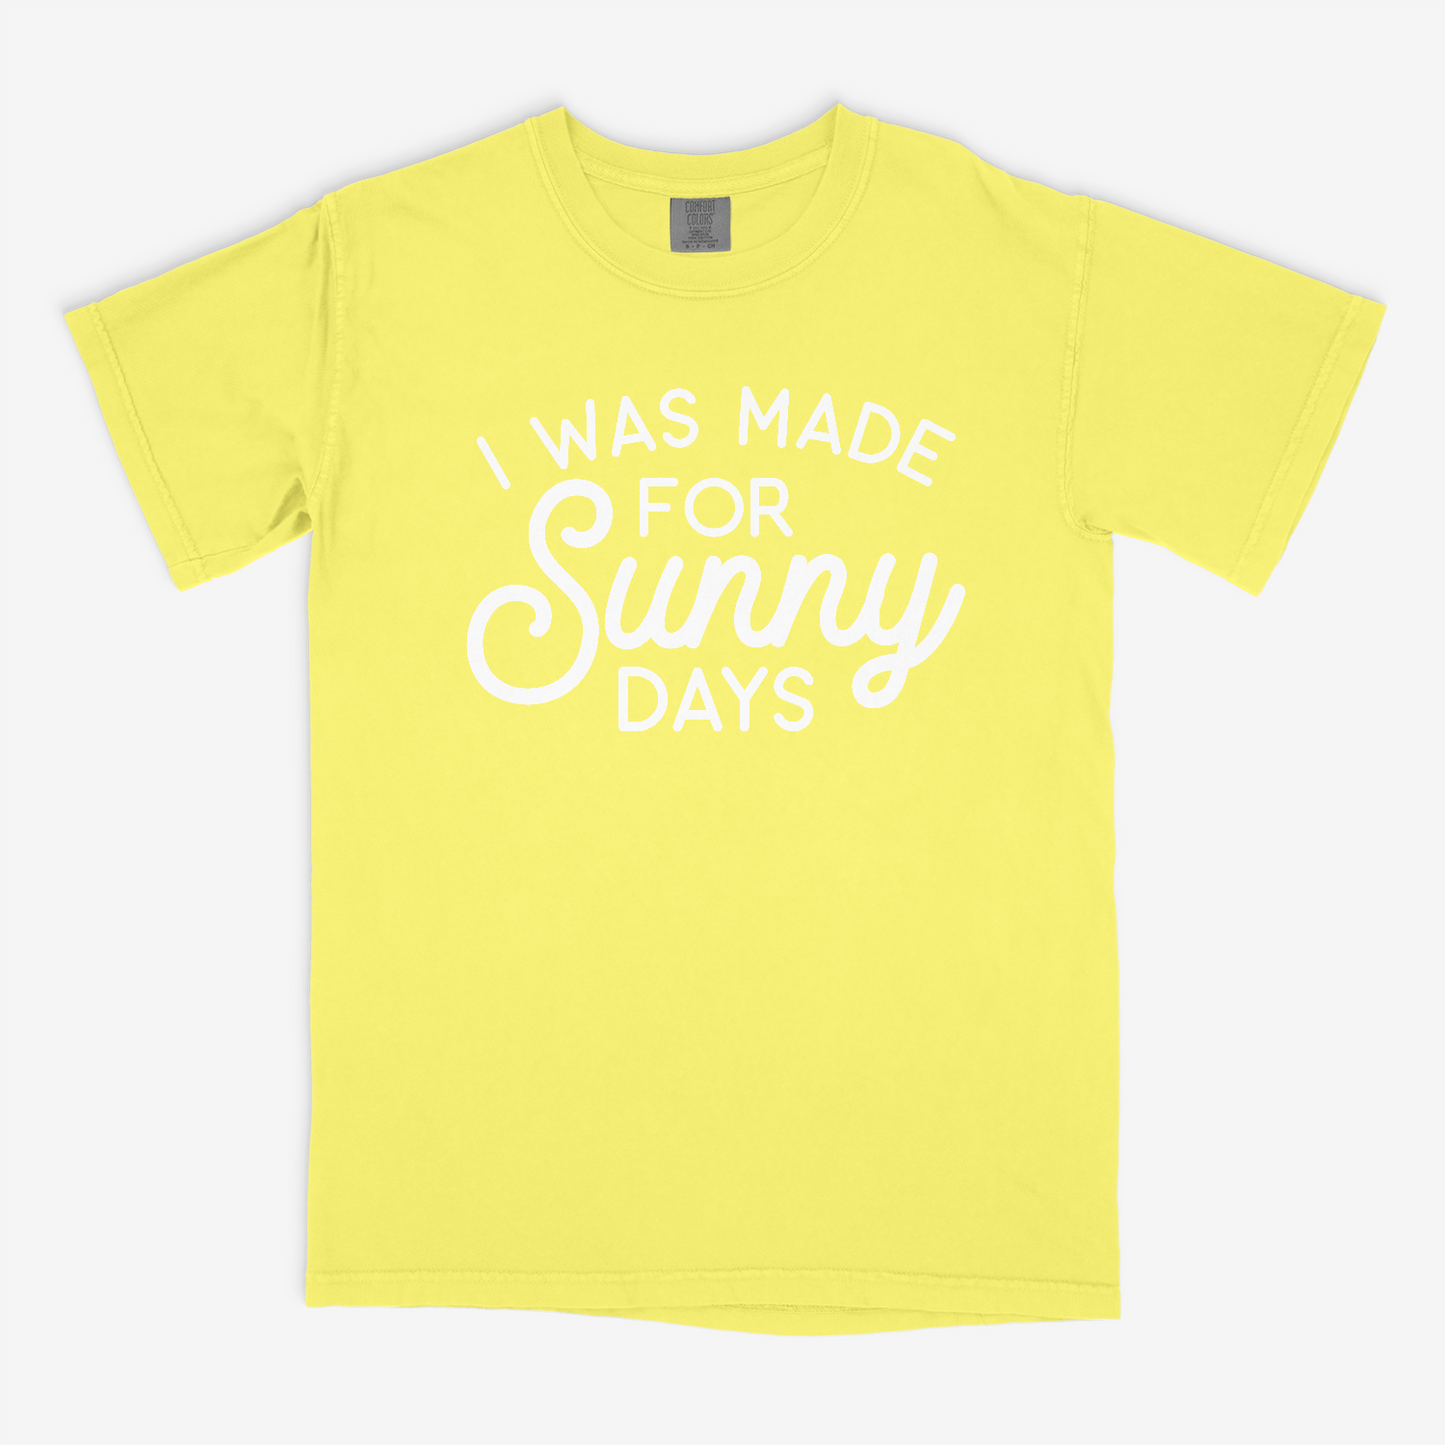 I Was Made for Sunny Days - Comfort Colors